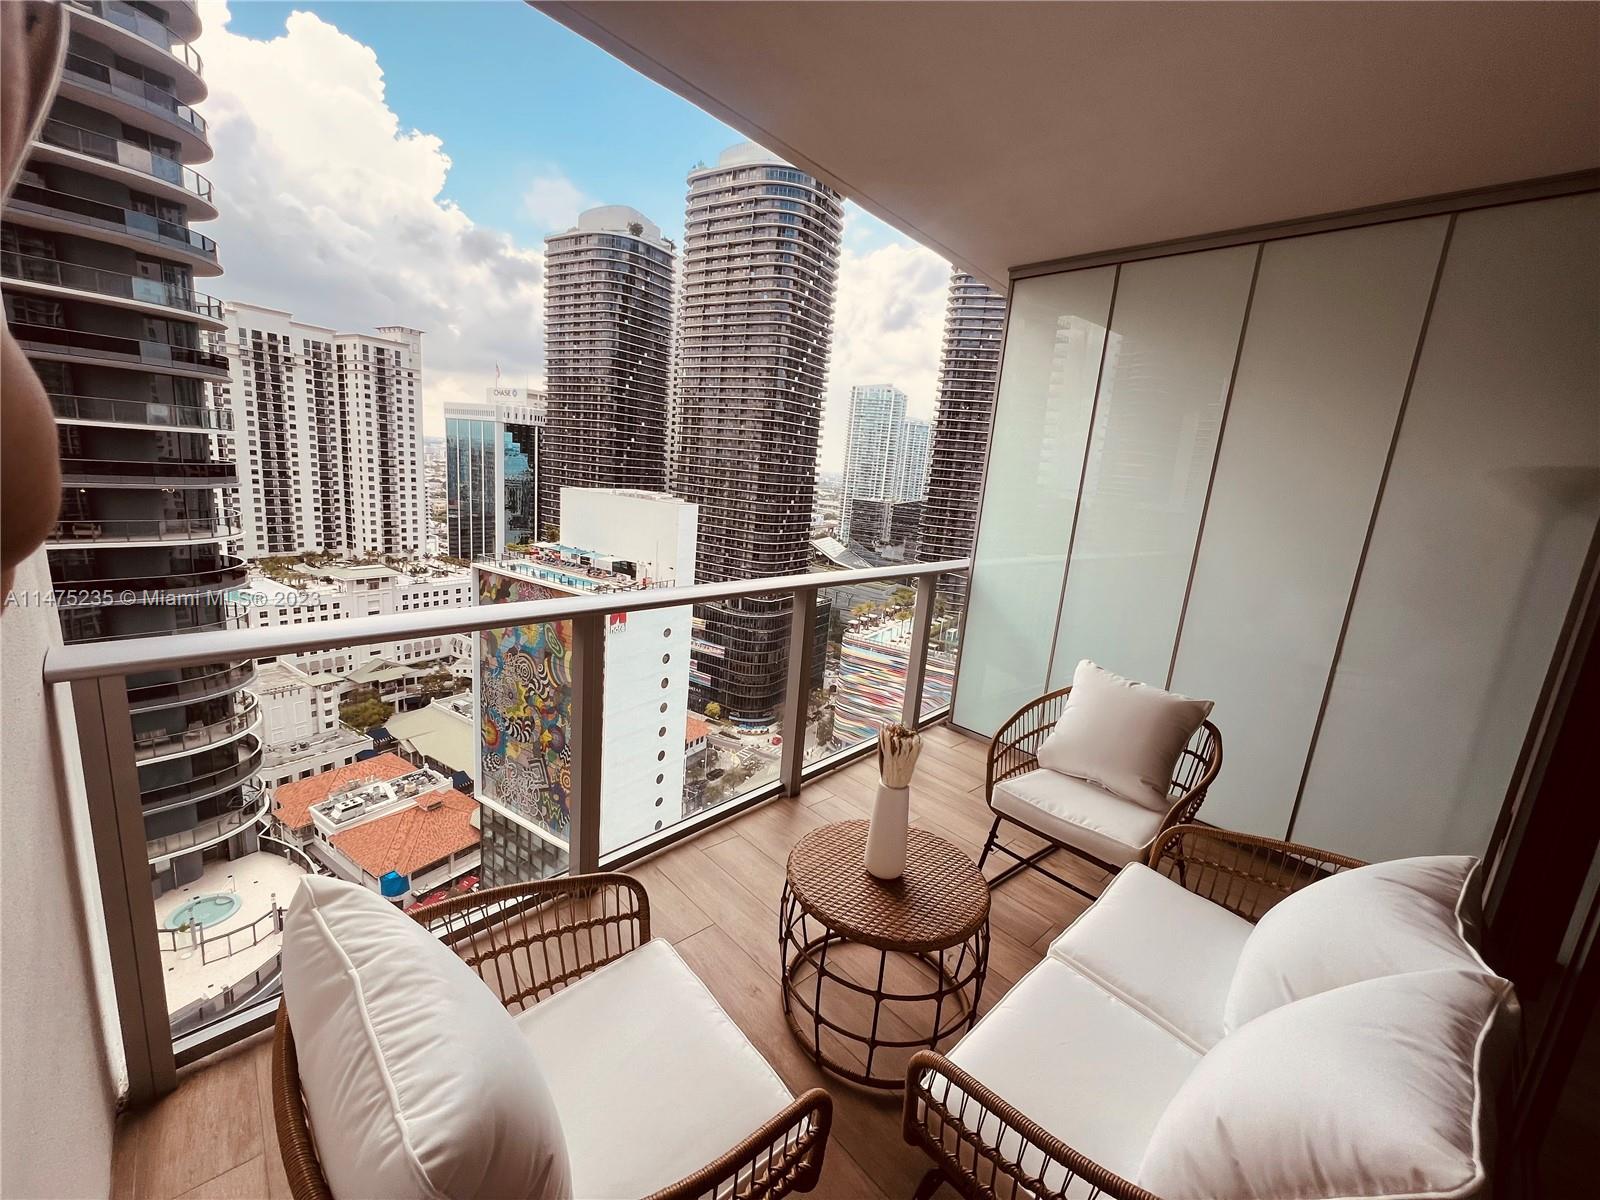 Amazing FURNISHED studio, LIFE STYLE, great floor plan. This building is one of the most complete in terms of amenities: soccer, game room with golf simulator, children's playground, gym, spa, roof top pool, rooftop BBQ area, running track. Located in the heart of Brickell in a booming city environment with restaurants and shops. Only a block from Brickell City Center. Easy access to South Beach, Downtown and the airport.